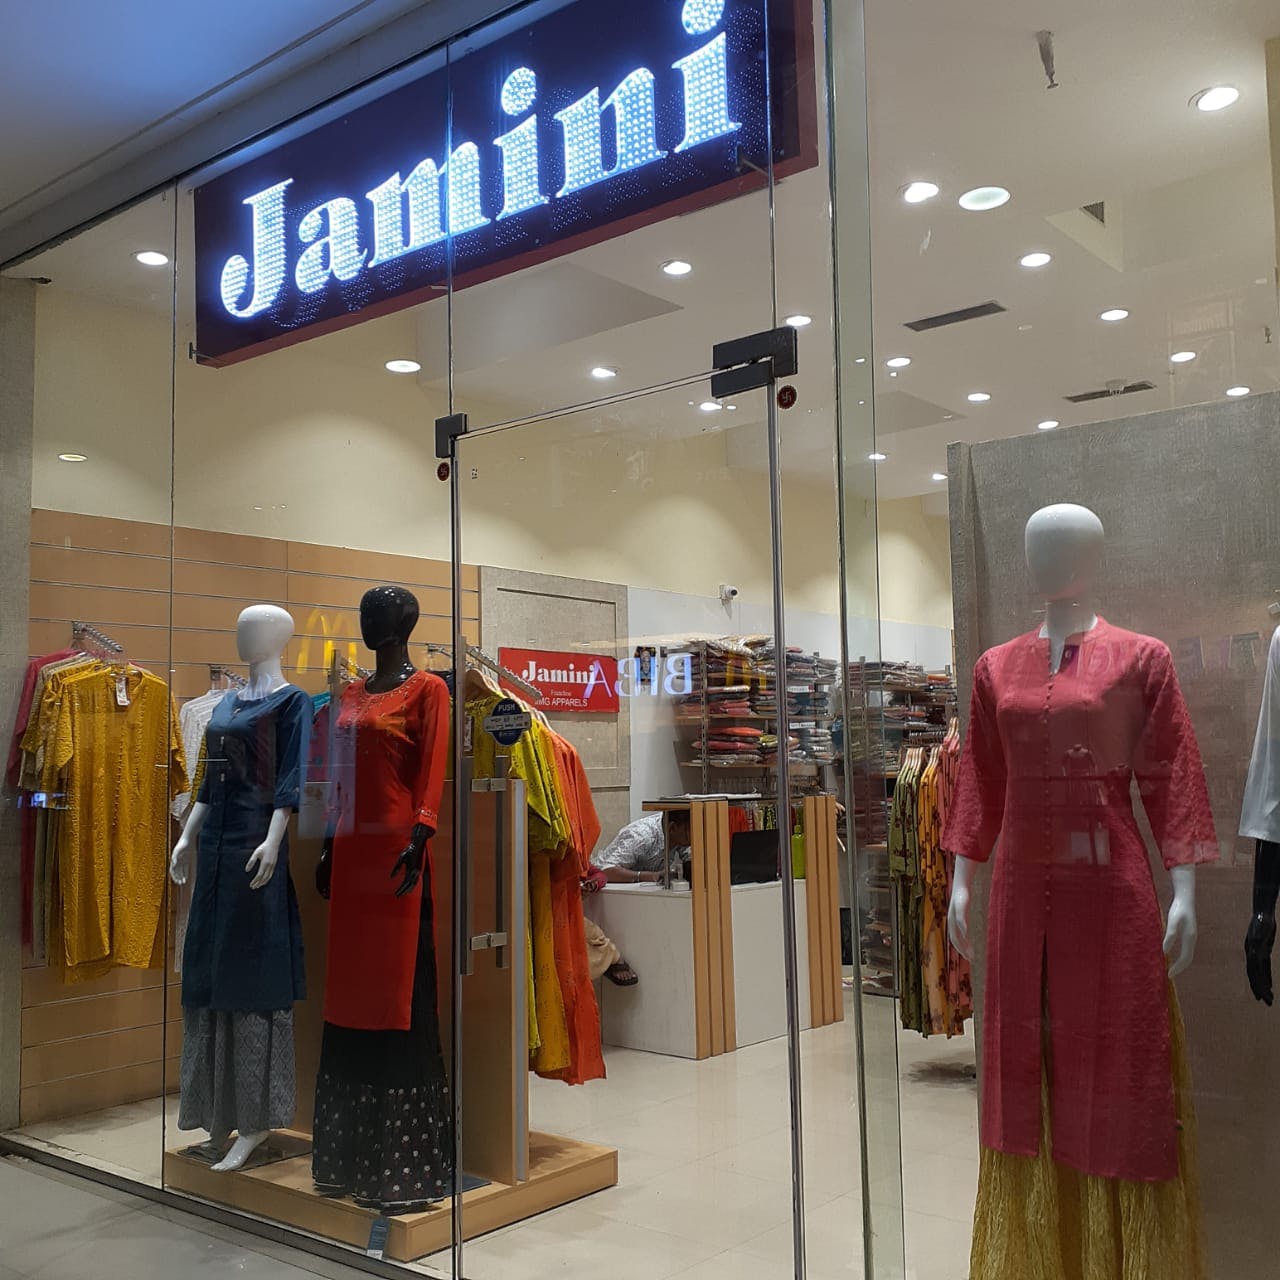 Boutique,Outlet store,Display window,Retail,Building,Shopping,Mannequin,Shopping mall